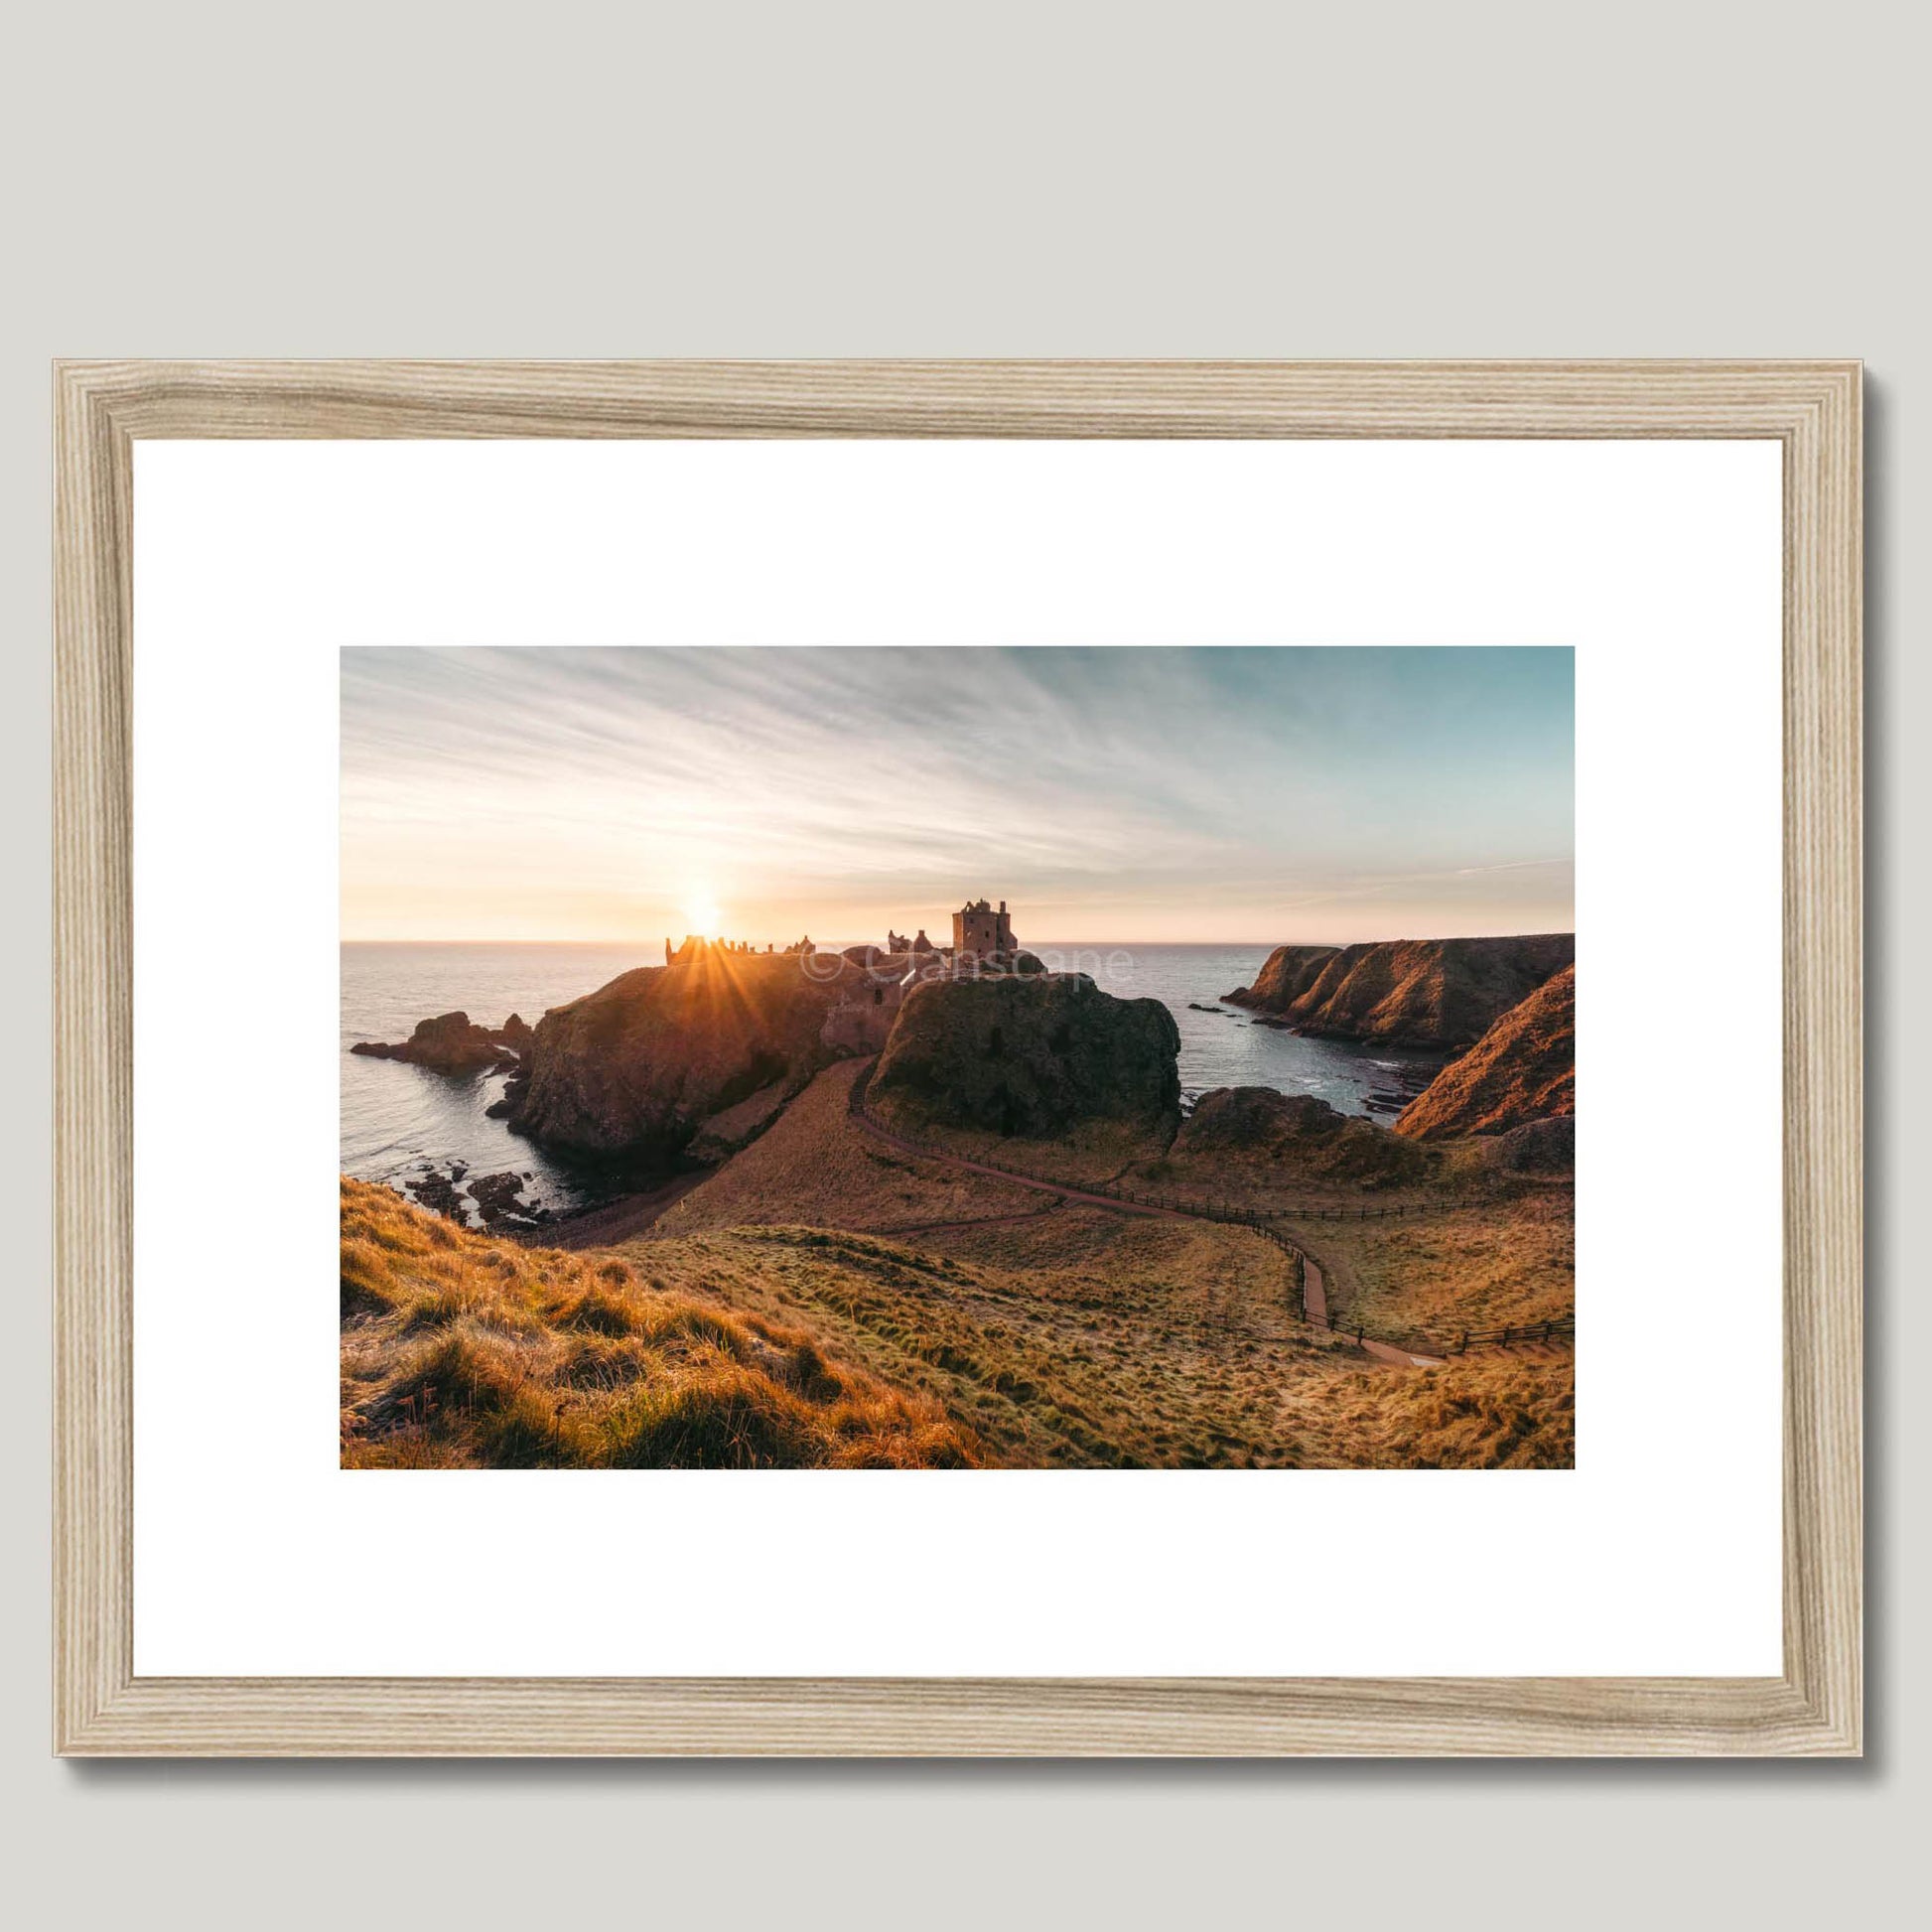 Clan Keith - Dunnotter Castle - Framed & Mounted Photo Print 16"x12" Natural